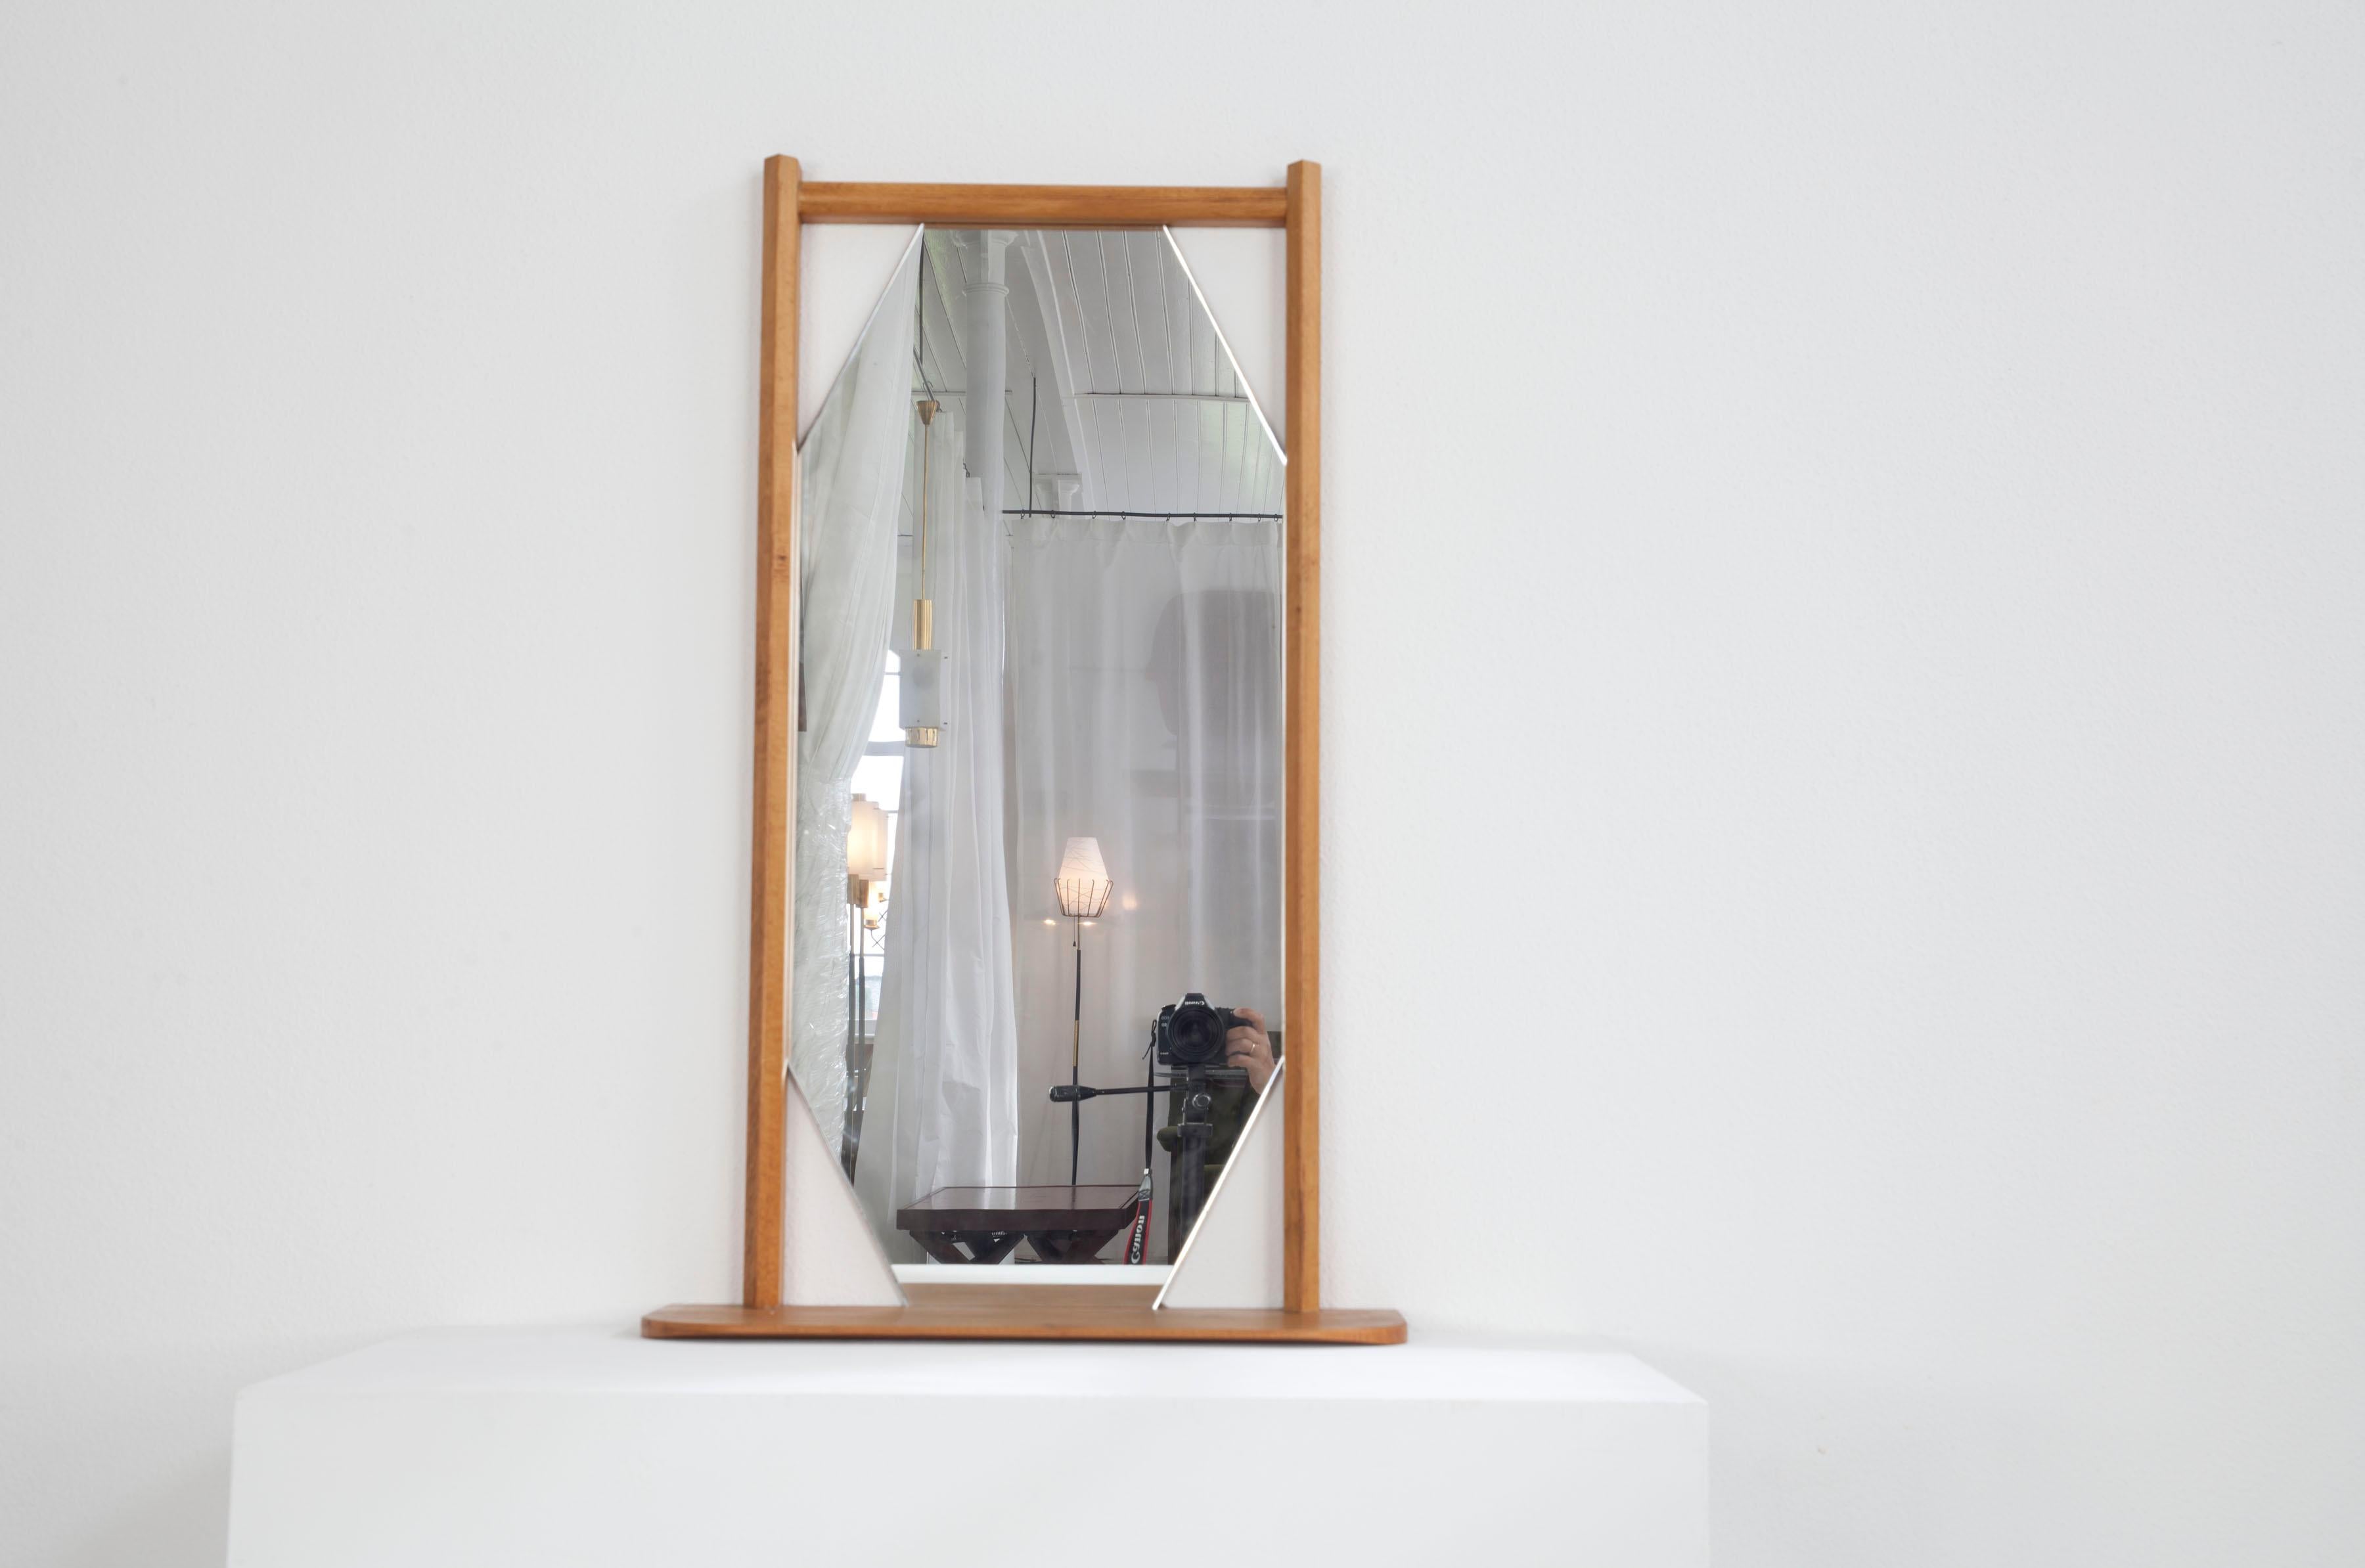 This Italian wall mirror dates from the 1960s. The mirror itself has the shape of an elongated hexagon. The beechwood frame, on the other hand, is rectangular. At the bottom of the frame there is a small practical shelf on which small items can be